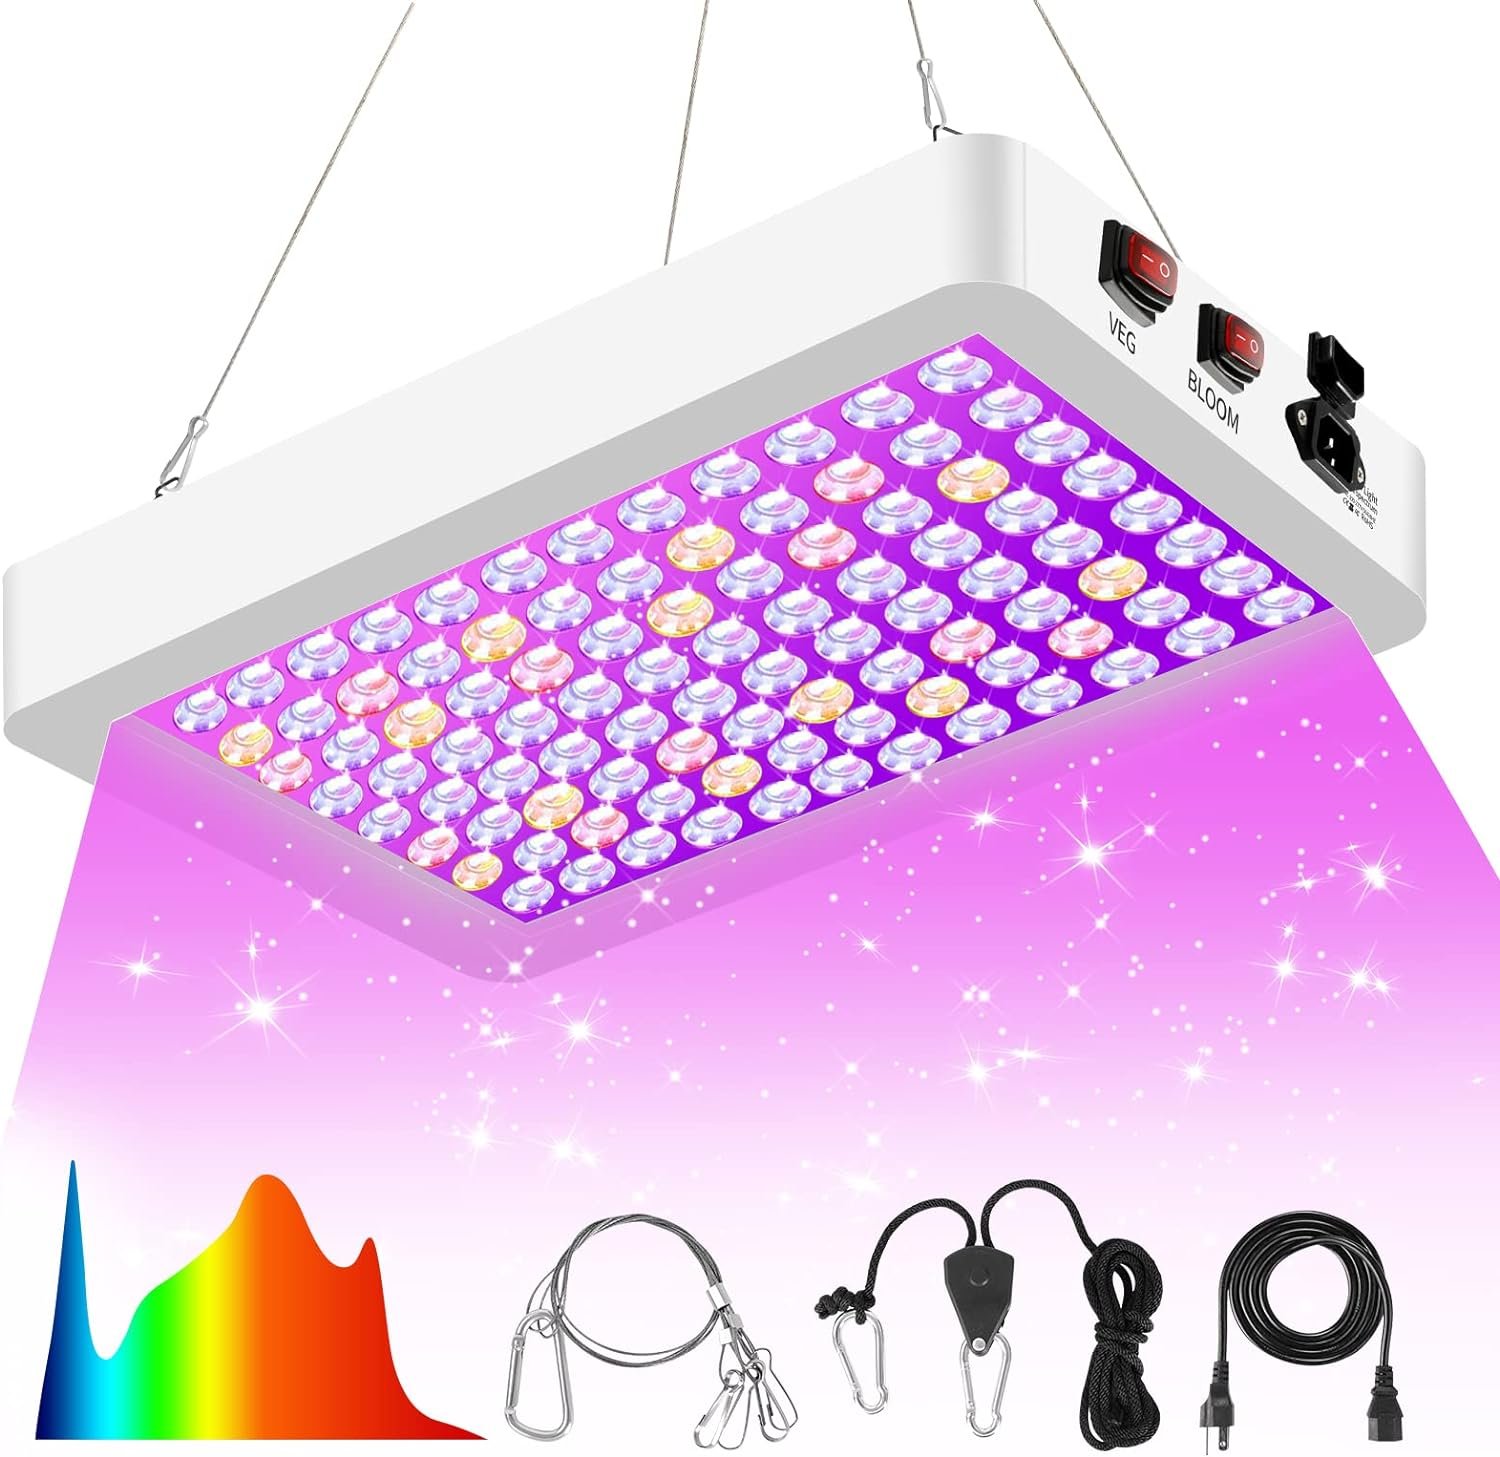 LUYIMIN Upgraded 1000W LED Grow Lights with Dual Switch, Double Chips Full Spectrum Plant Light, Grow Lights for Indoor Hydroponic Plants Veg Flower Growing Lamps